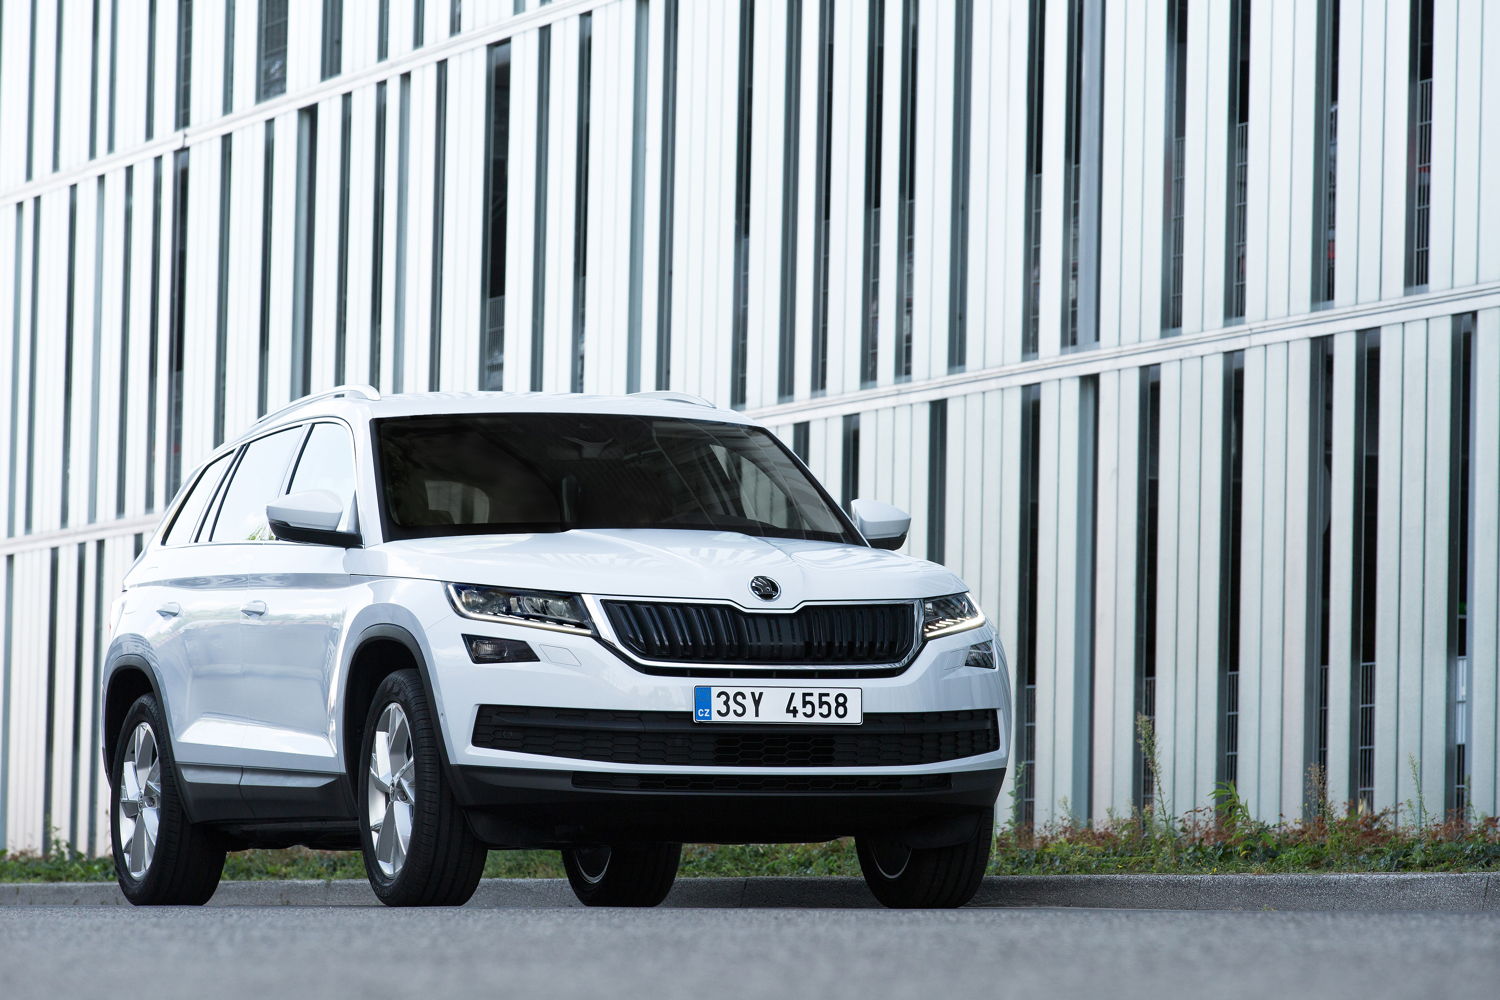 The long-established Czech brand recorded 585,000 deliveries worldwide in the first six months – thus surpassing last year’s record result by 2.8 per cent (January to June 2016: 569,400 vehicles). The ŠKODA KODIAQ SUV (pictured) had a good start in worldwide markets with 27,100 new deliveries since February.